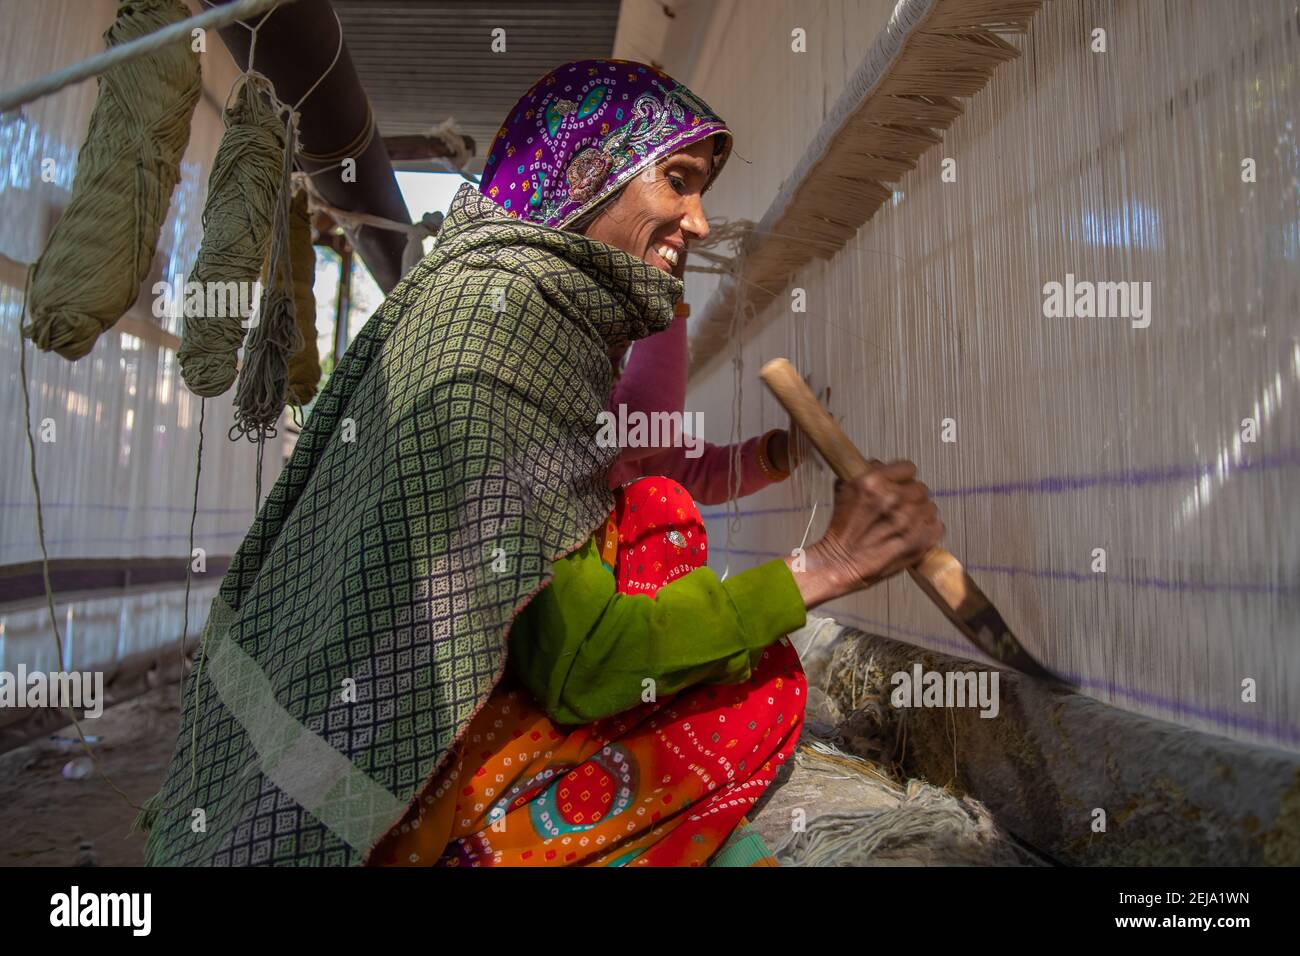 Uttar Pradesh. 05-15-2018. Women working with yarn in the textile industry. Women apart of taking care of children, they have an important role financ Stock Photo